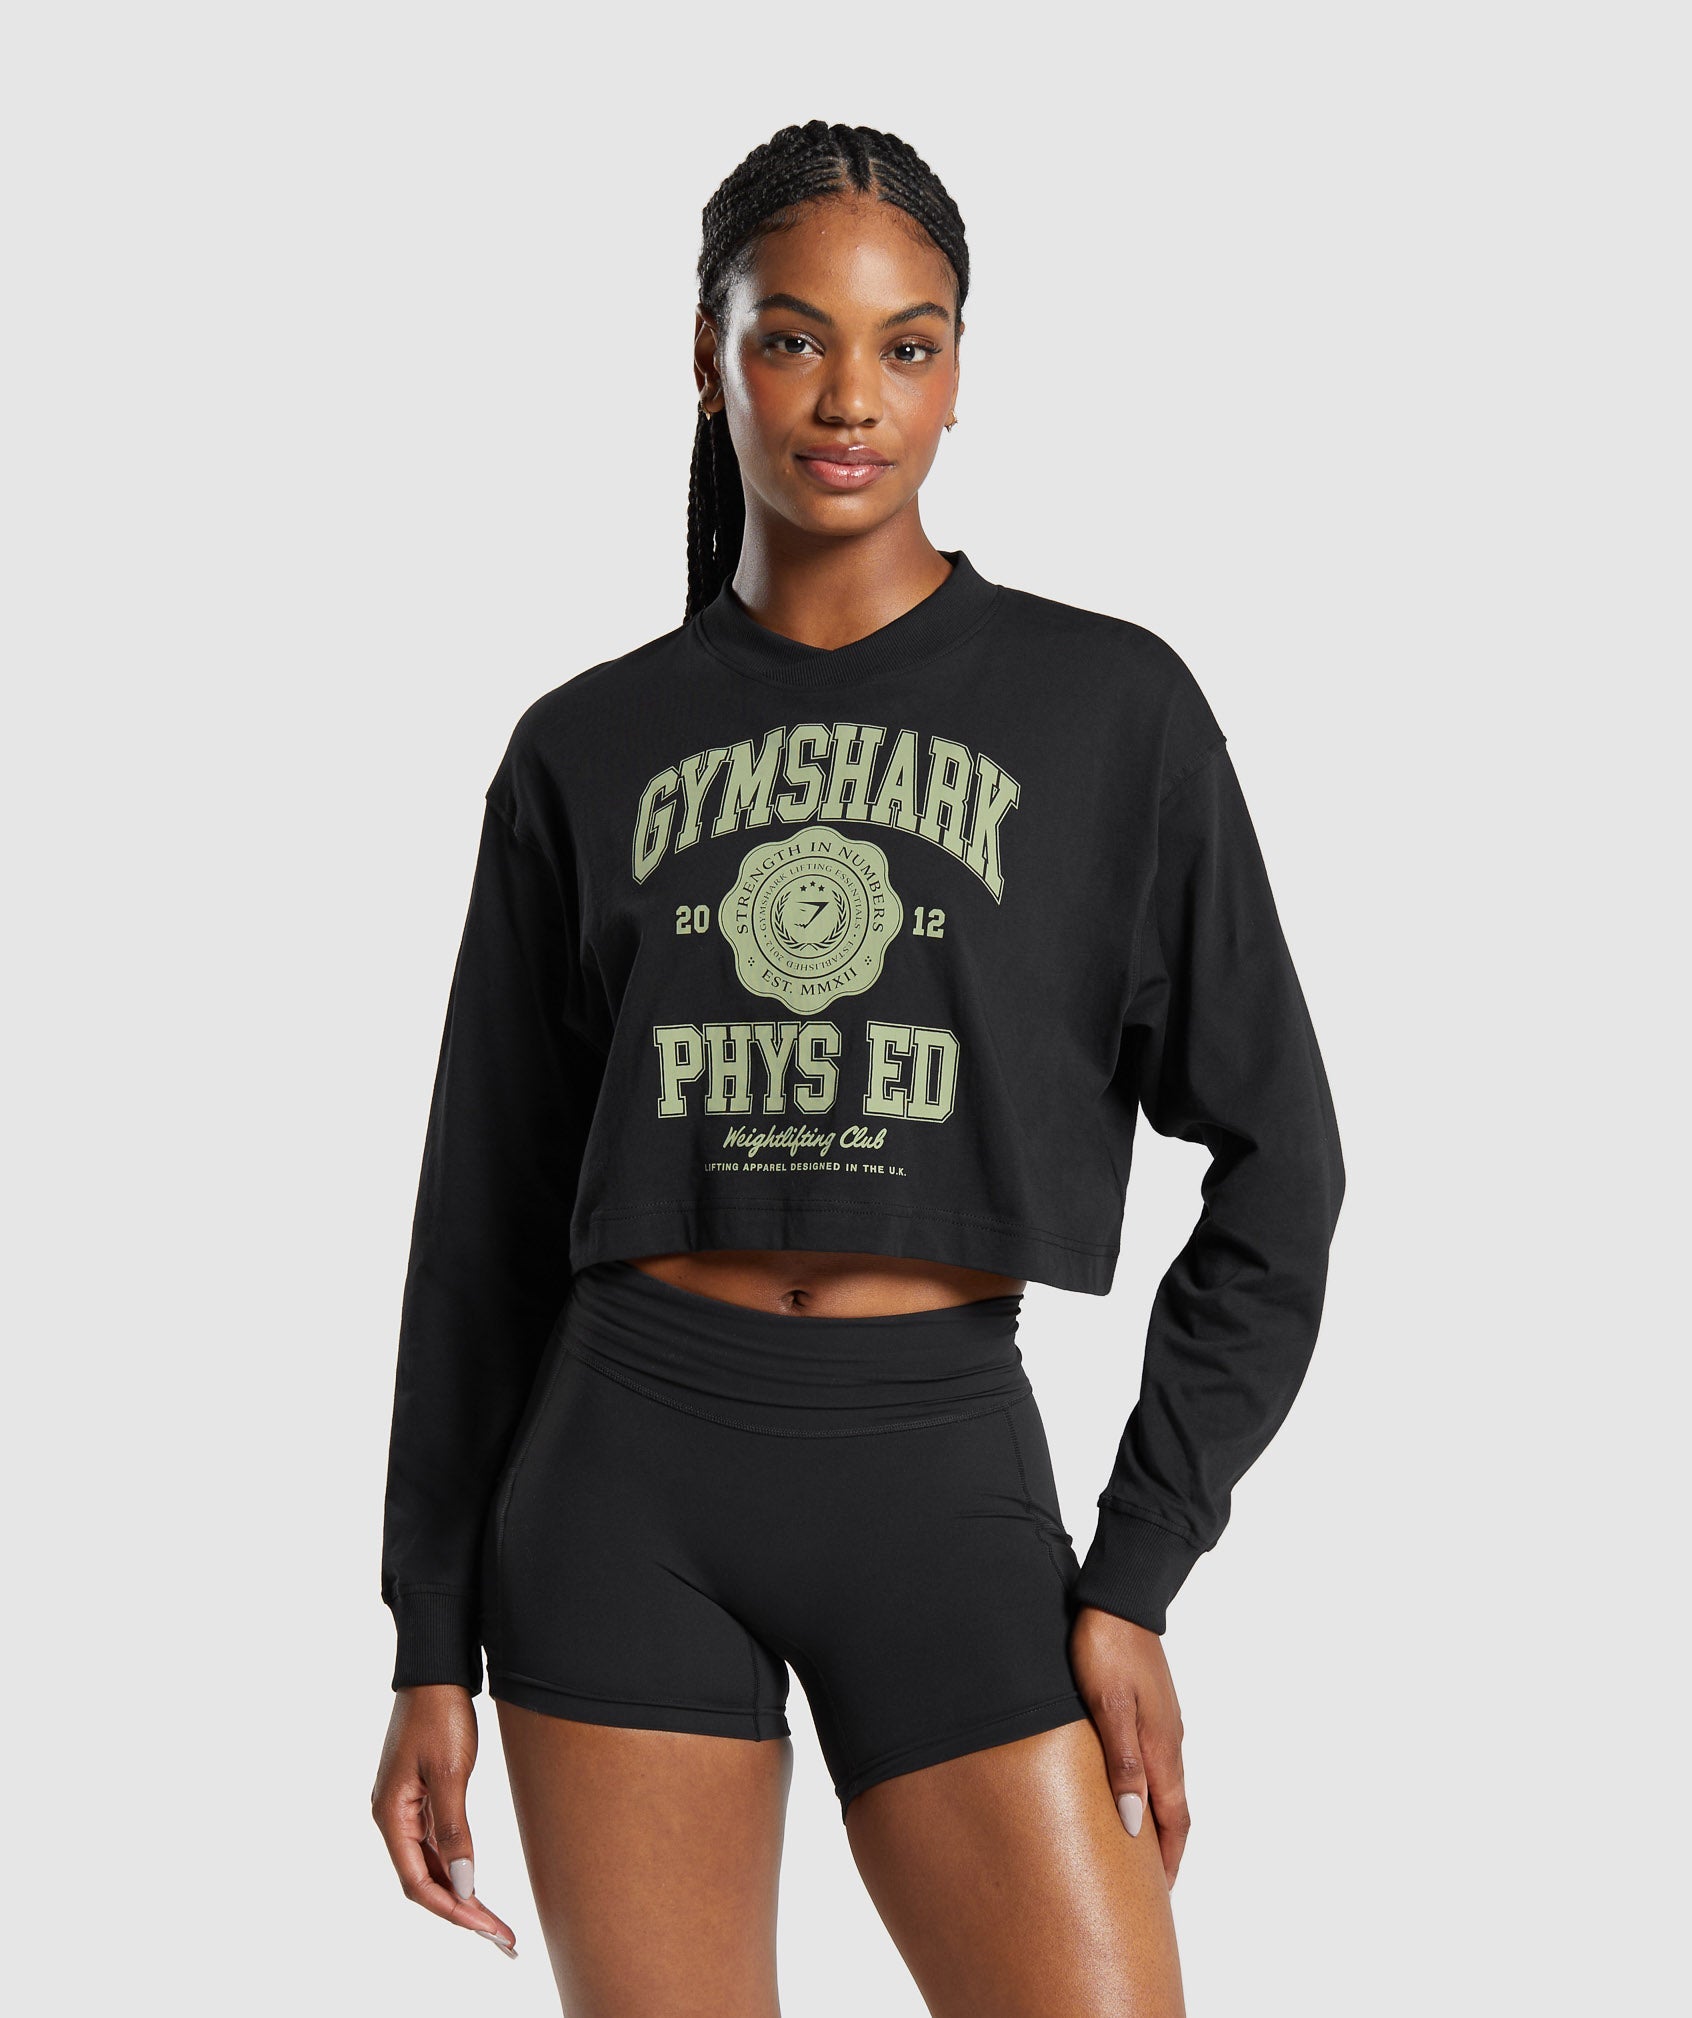 Phys Ed Graphic Long Sleeve T-Shirt in Black